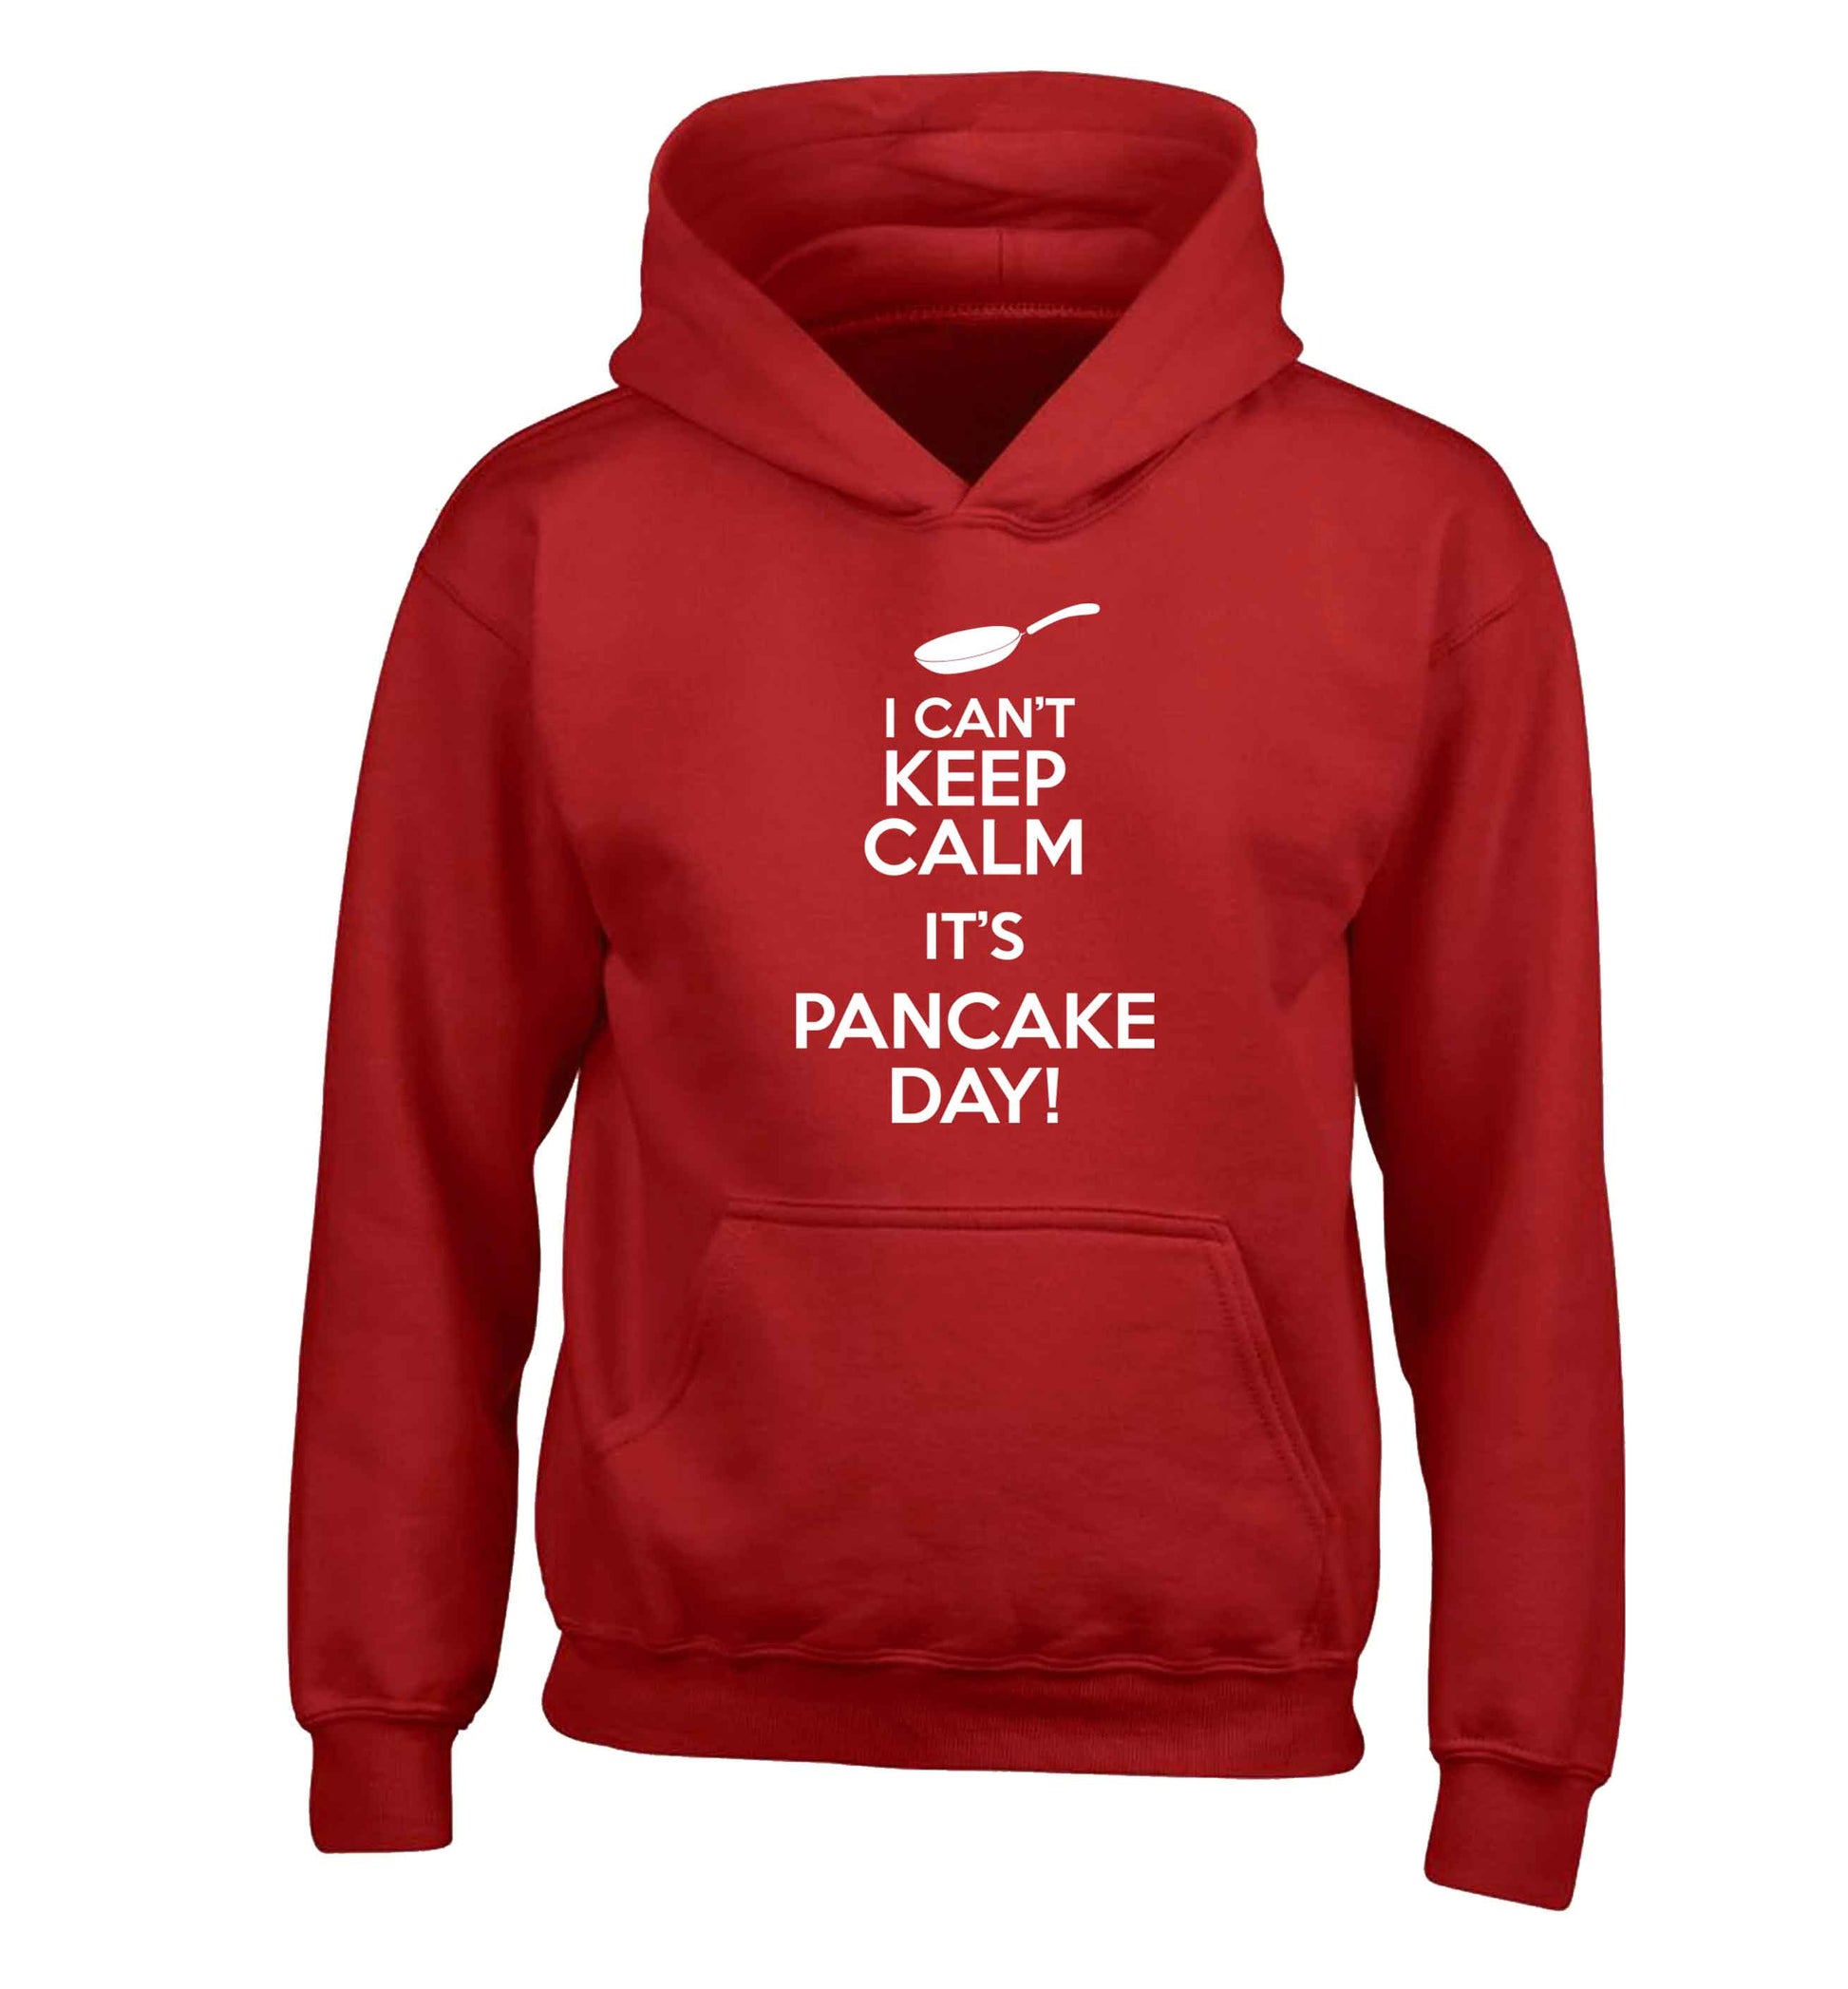 I can't keep calm it's pancake day! children's red hoodie 12-13 Years